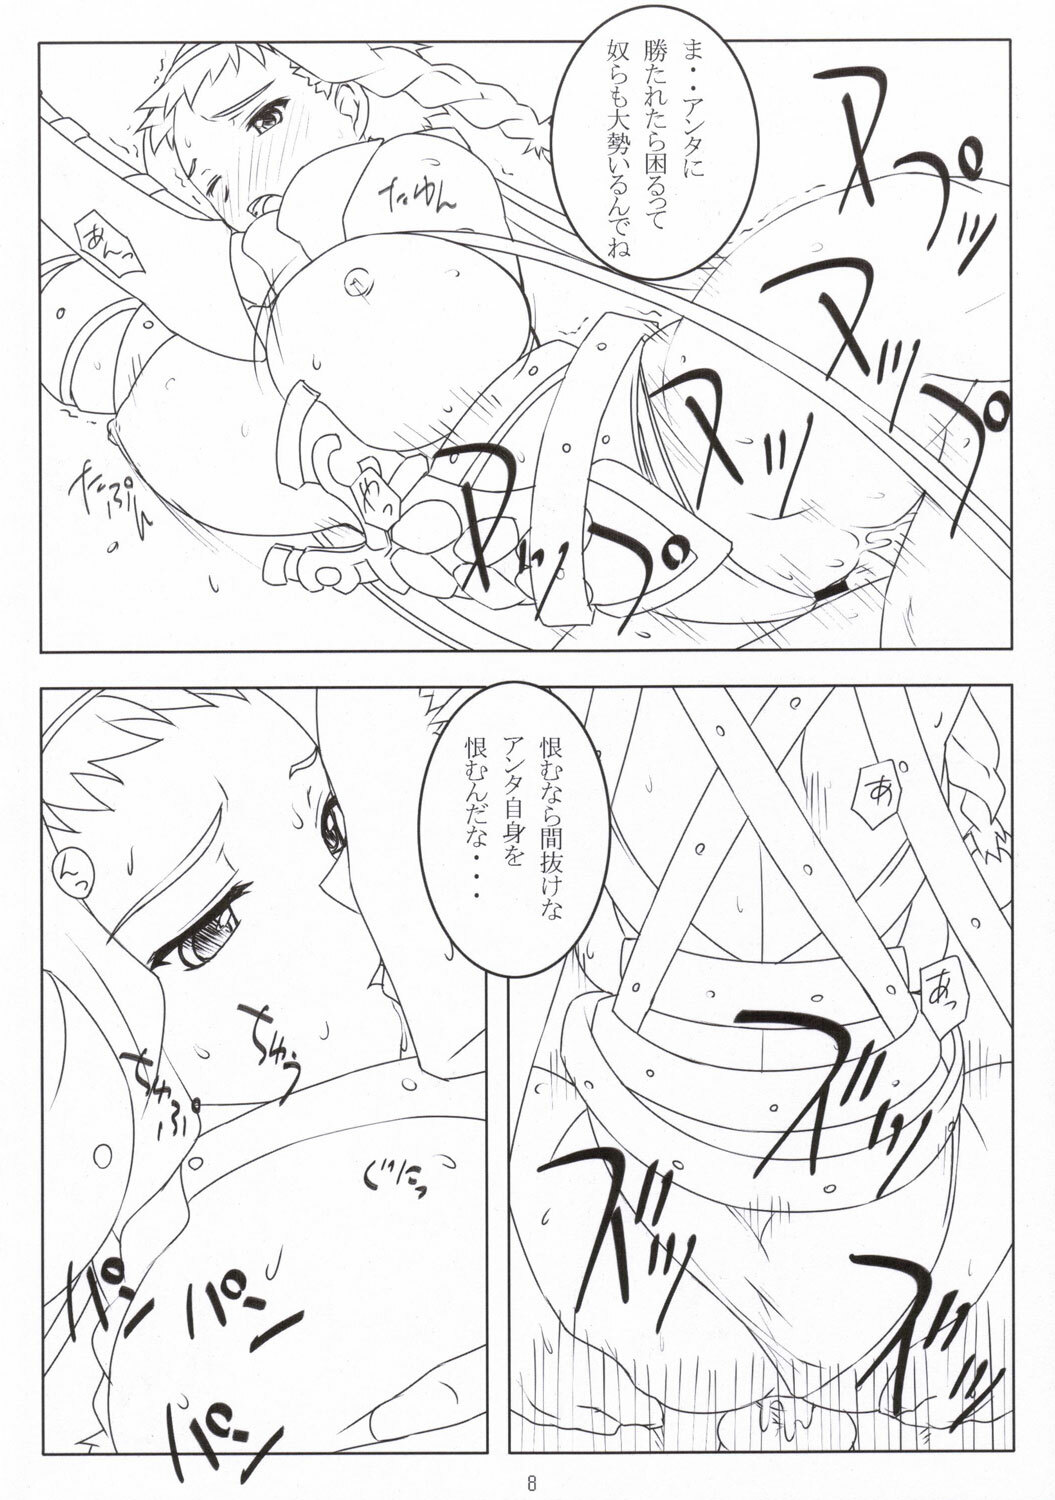 (C69) [NF121 (Midori Aoi)] Ken to Megane (Queen's Blade) page 7 full